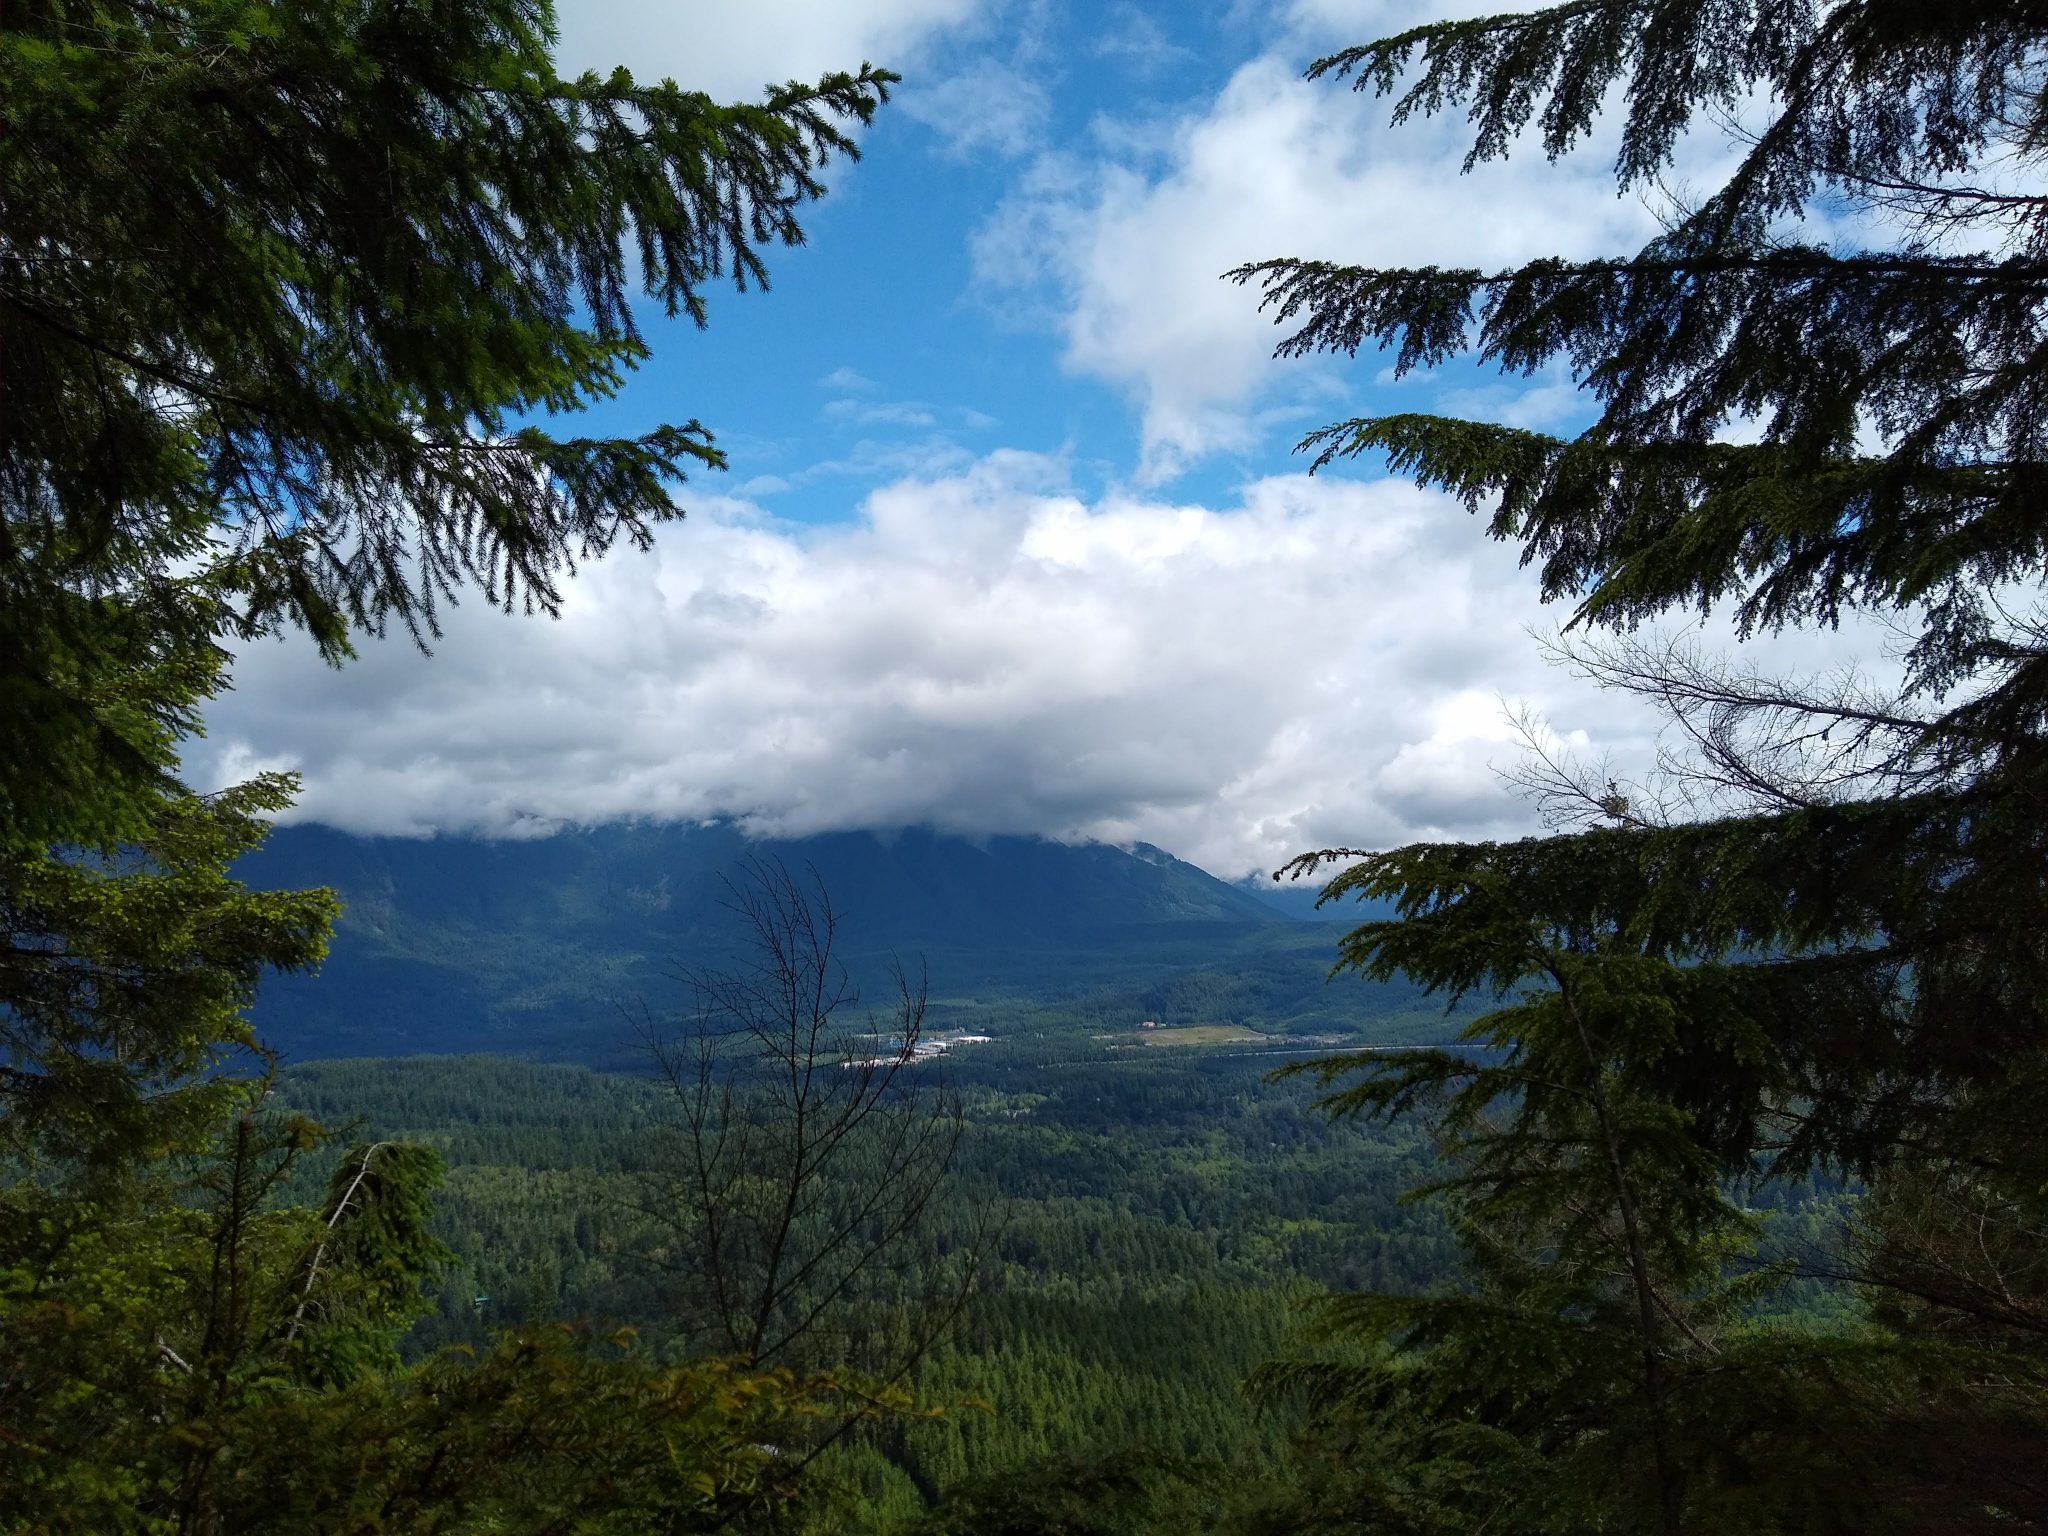 A view across a forested valley from Cedar Butte hike summit. It's a cloudy day with a bit of blue sky, and there are larger evergreen trees in the foreground